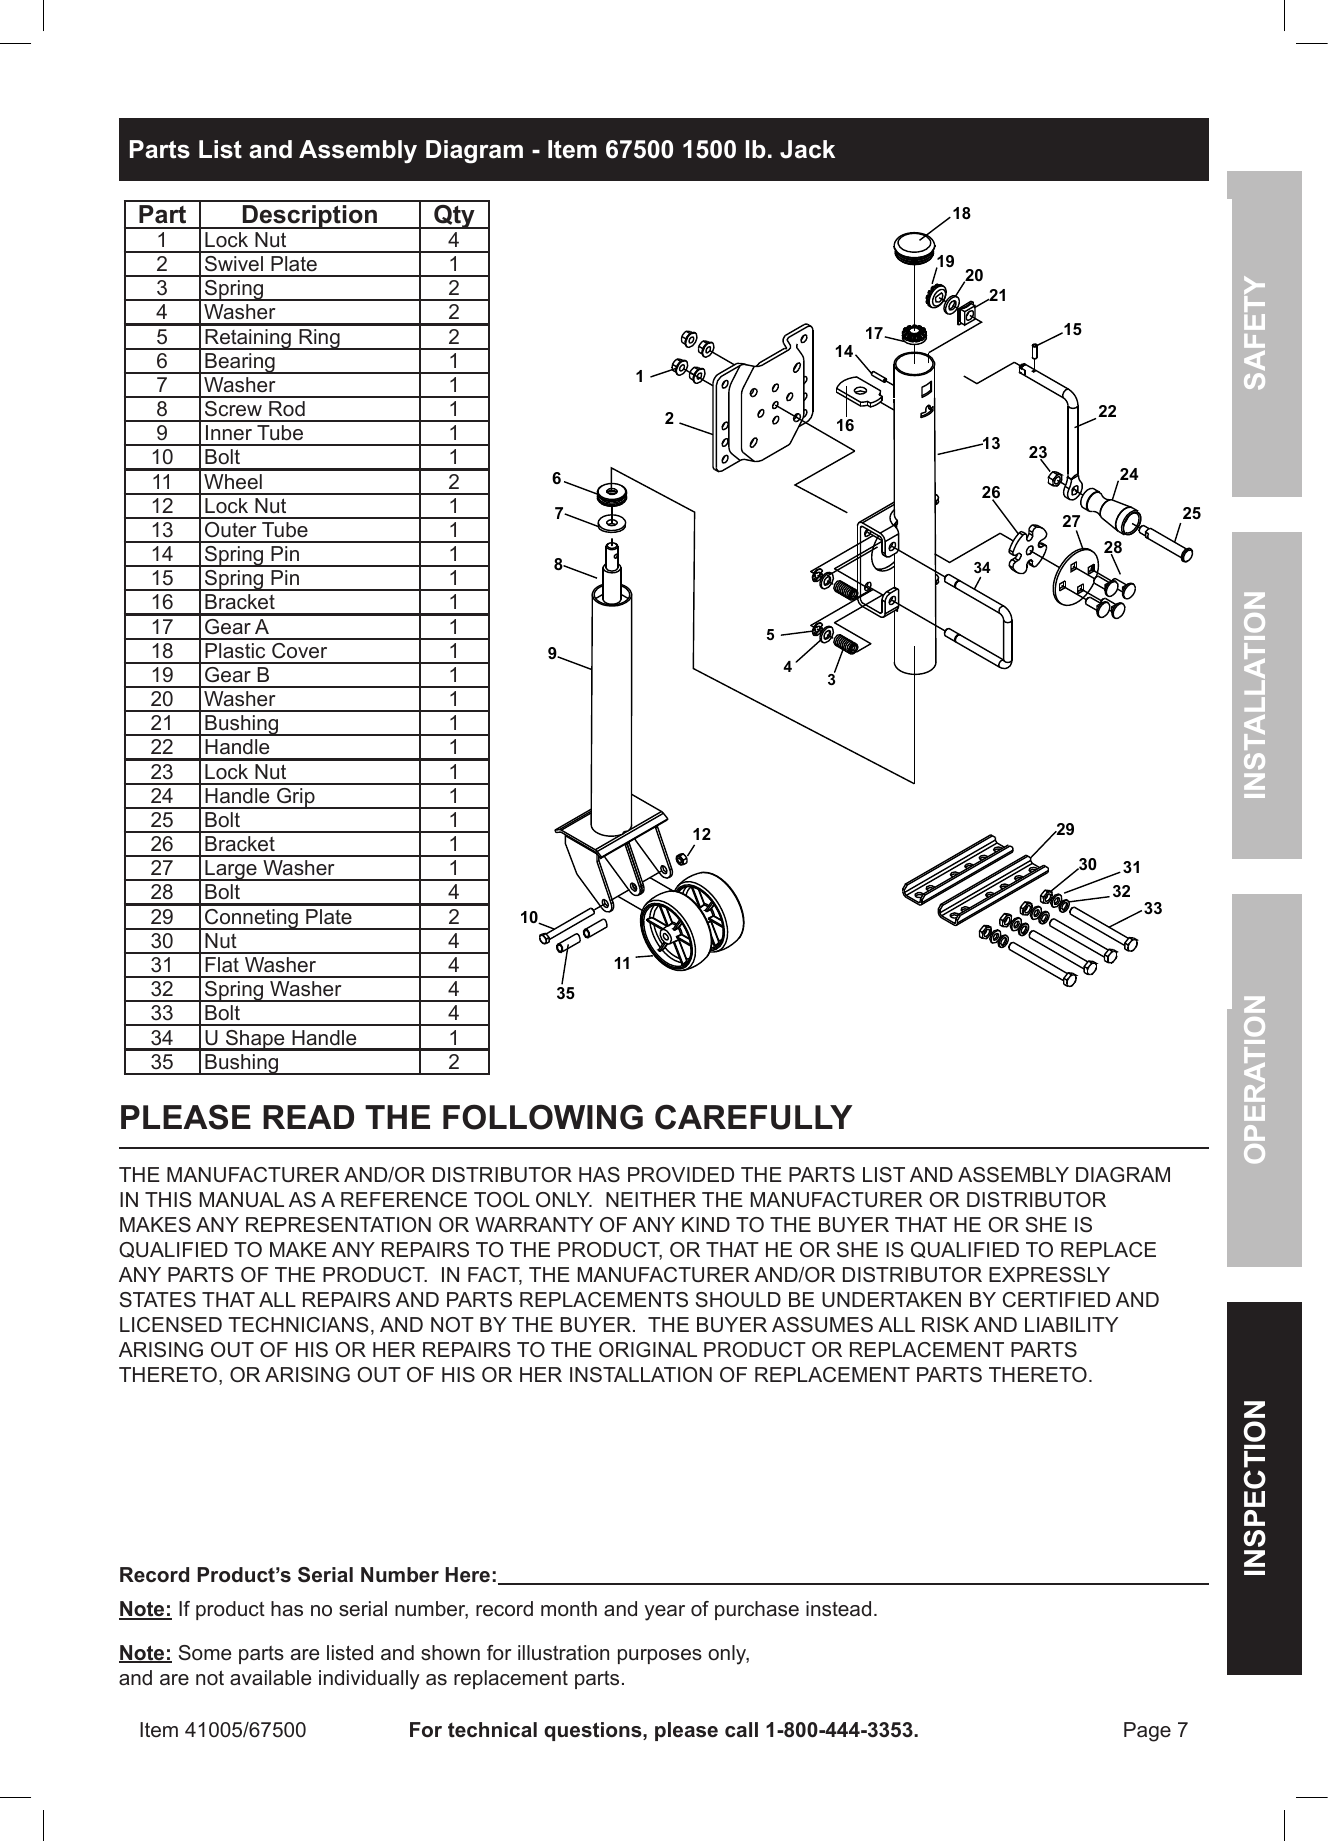 Page 7 of 8 - Harbor-Freight Harbor-Freight-1000-Lb-Capacity-Swing-Back-Trailer-Jack-Product-Manual-  Harbor-freight-1000-lb-capacity-swing-back-trailer-jack-product-manual